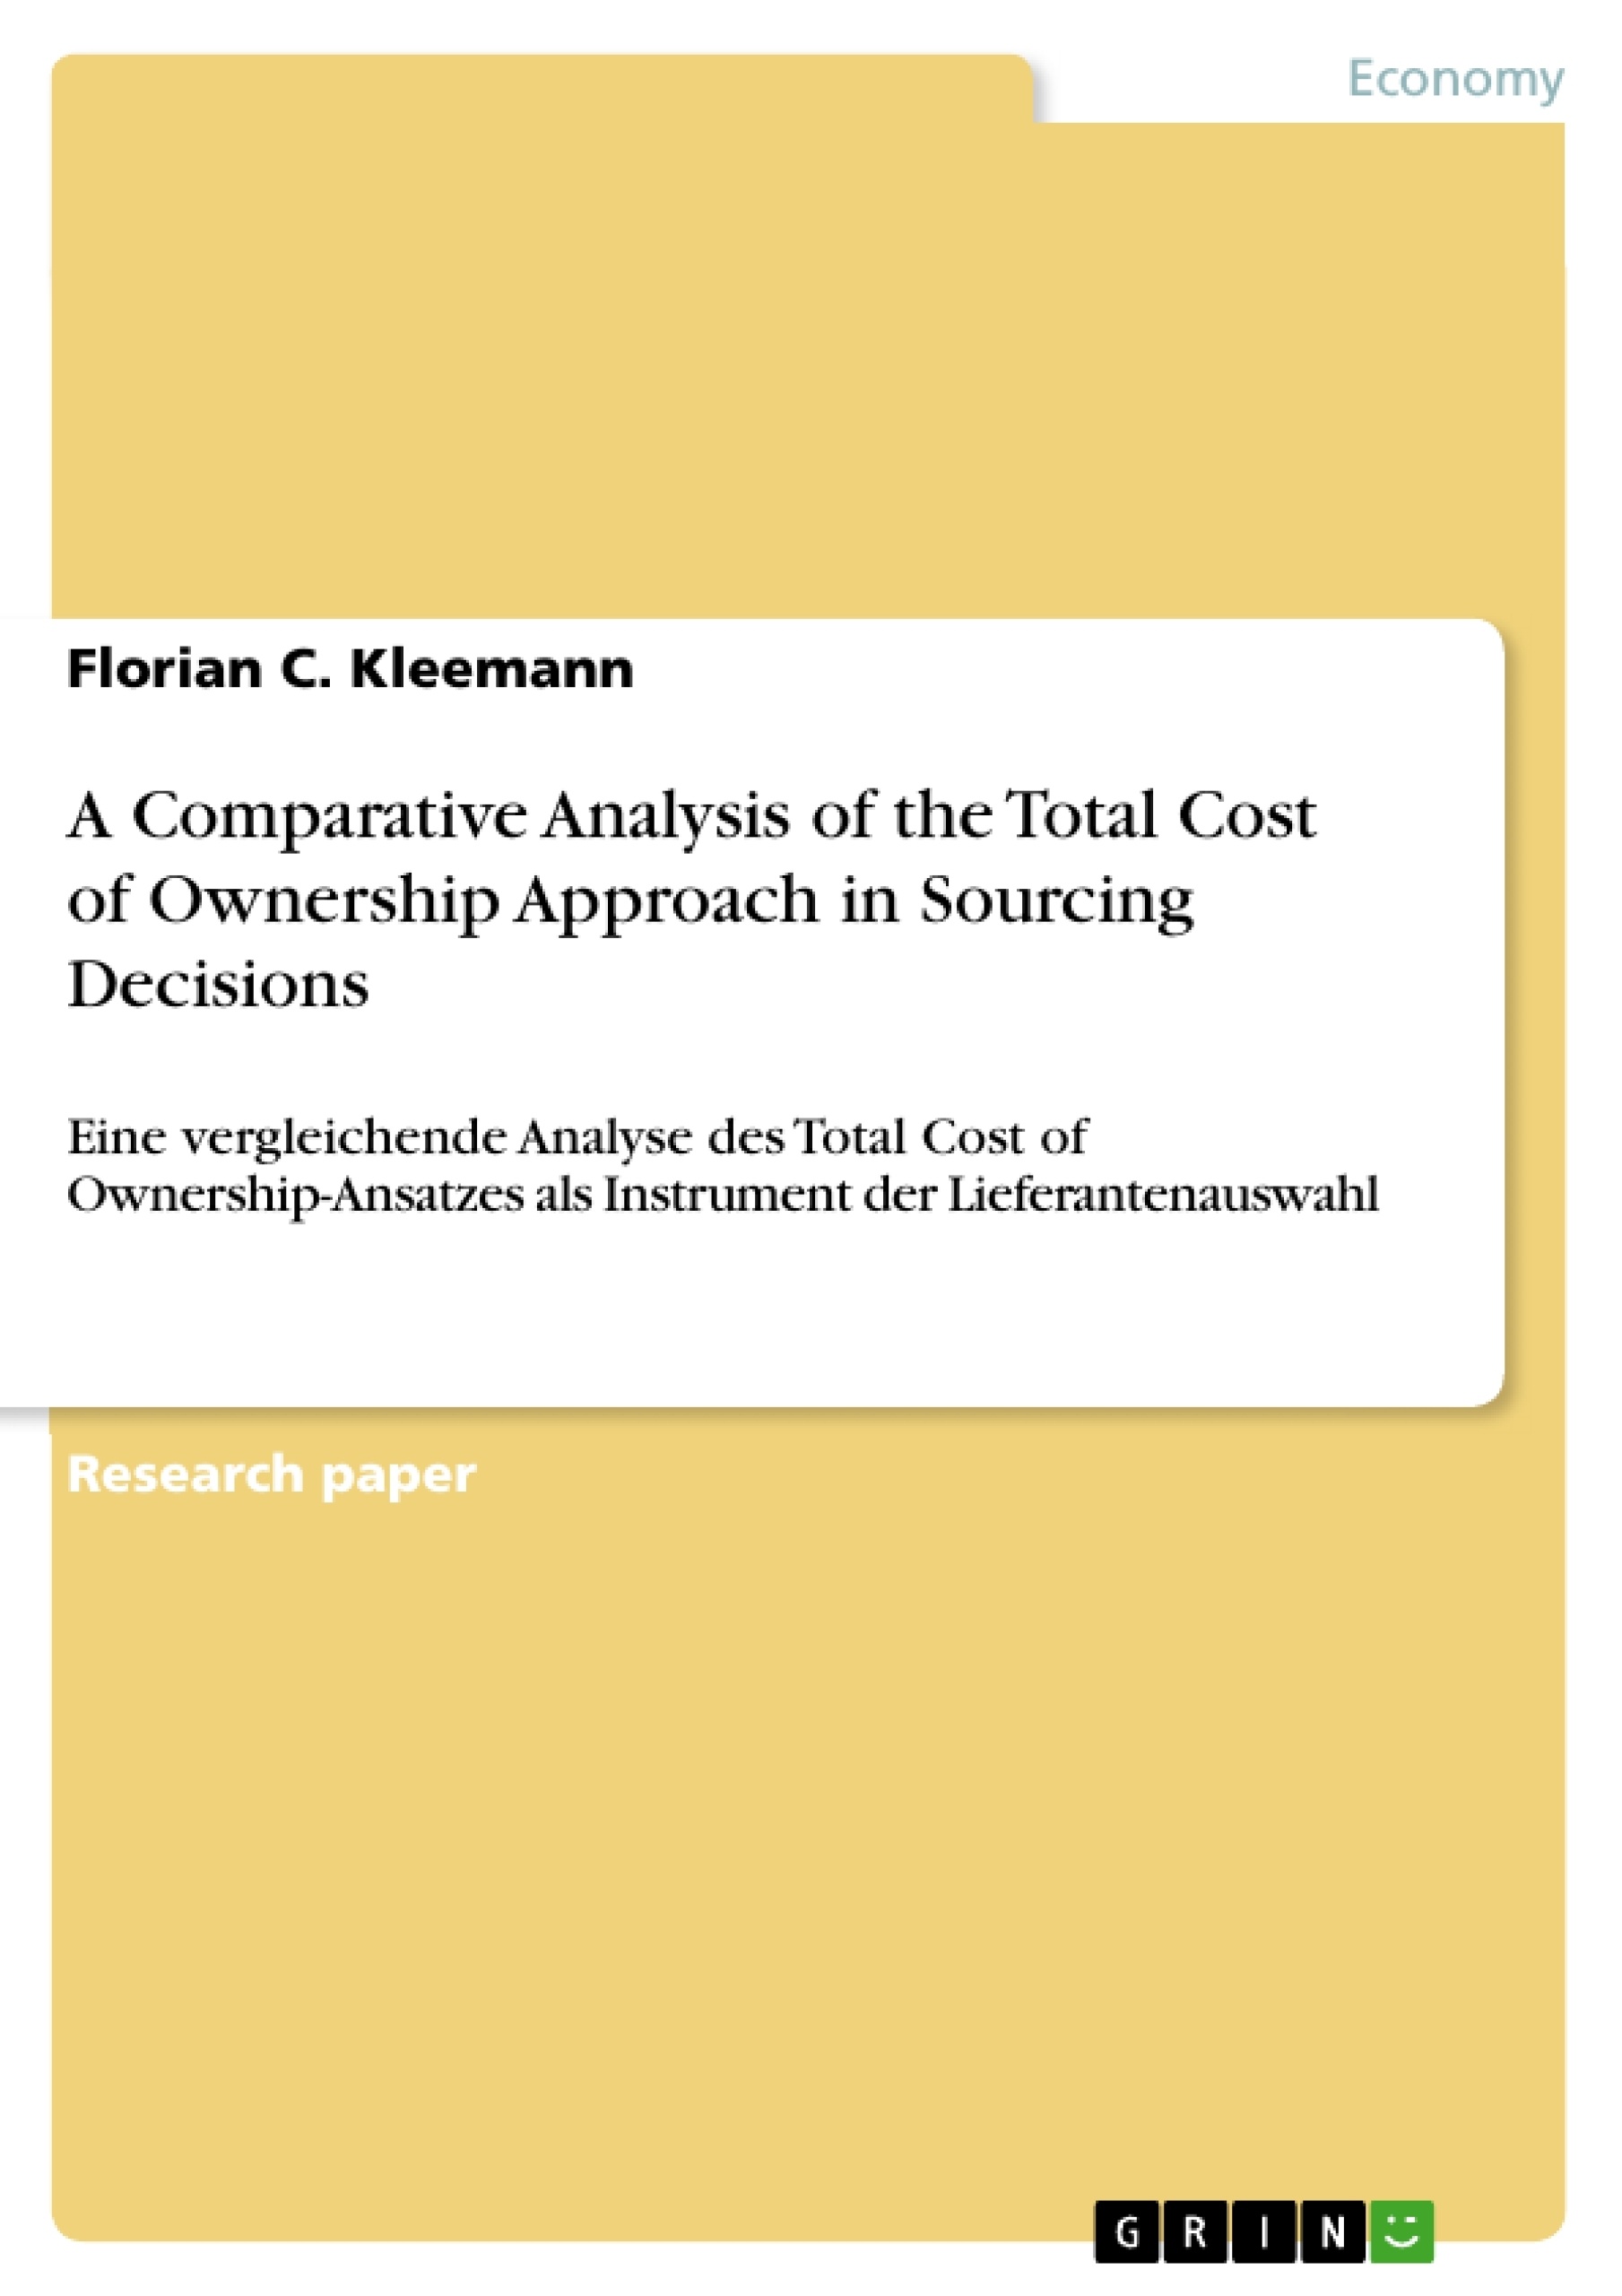 Titre: A Comparative Analysis of the Total Cost of Ownership Approach in Sourcing Decisions